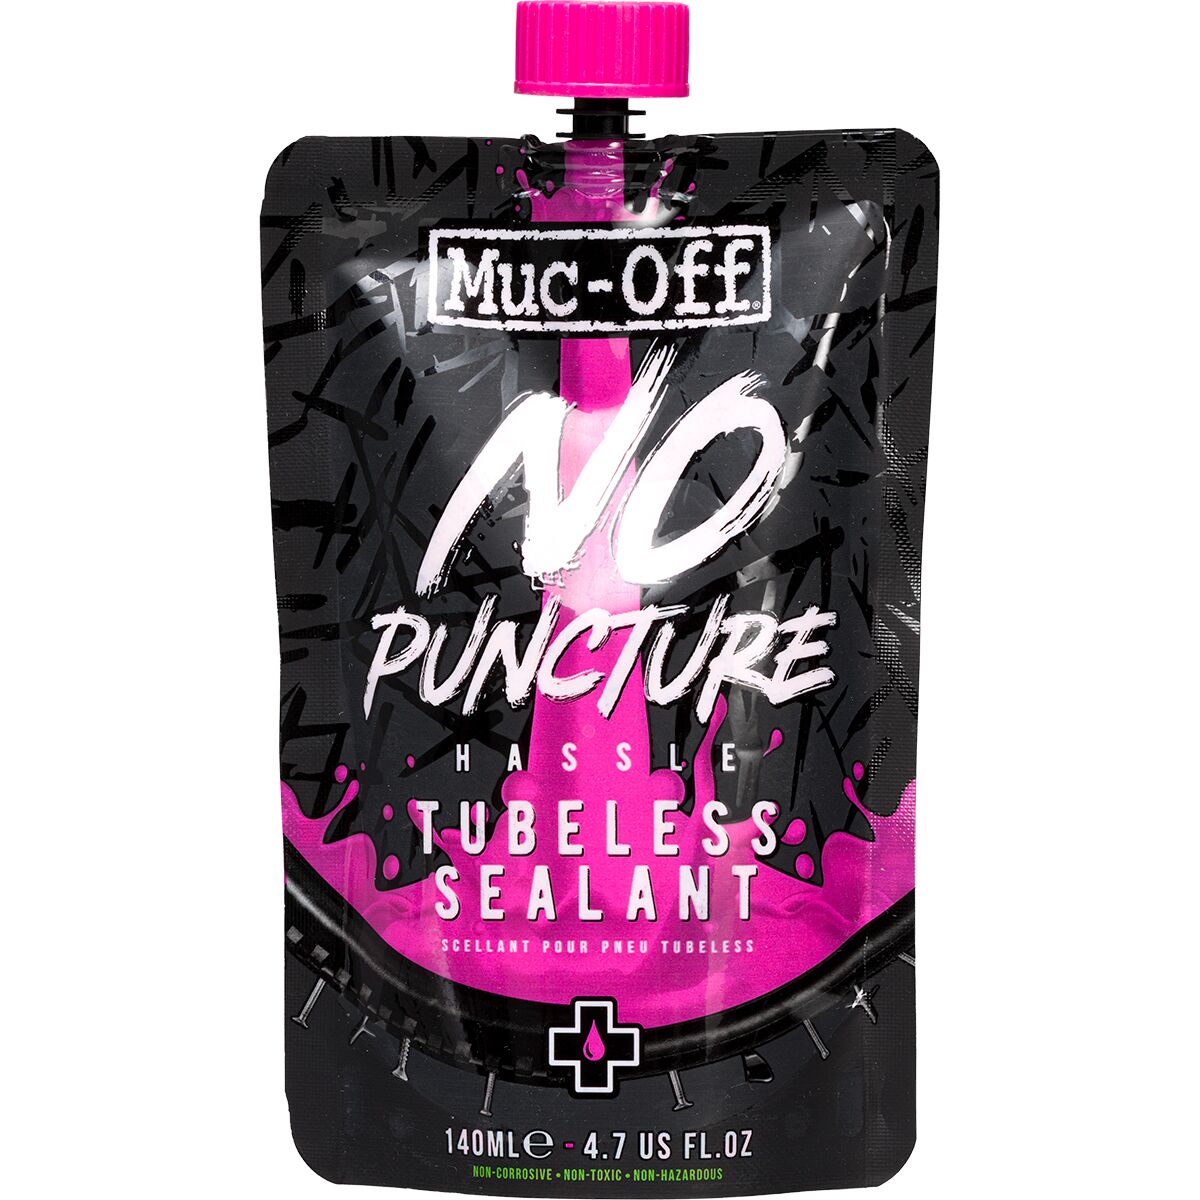 Muc-Off No Puncture Hassle Tubeless Tire Sealant